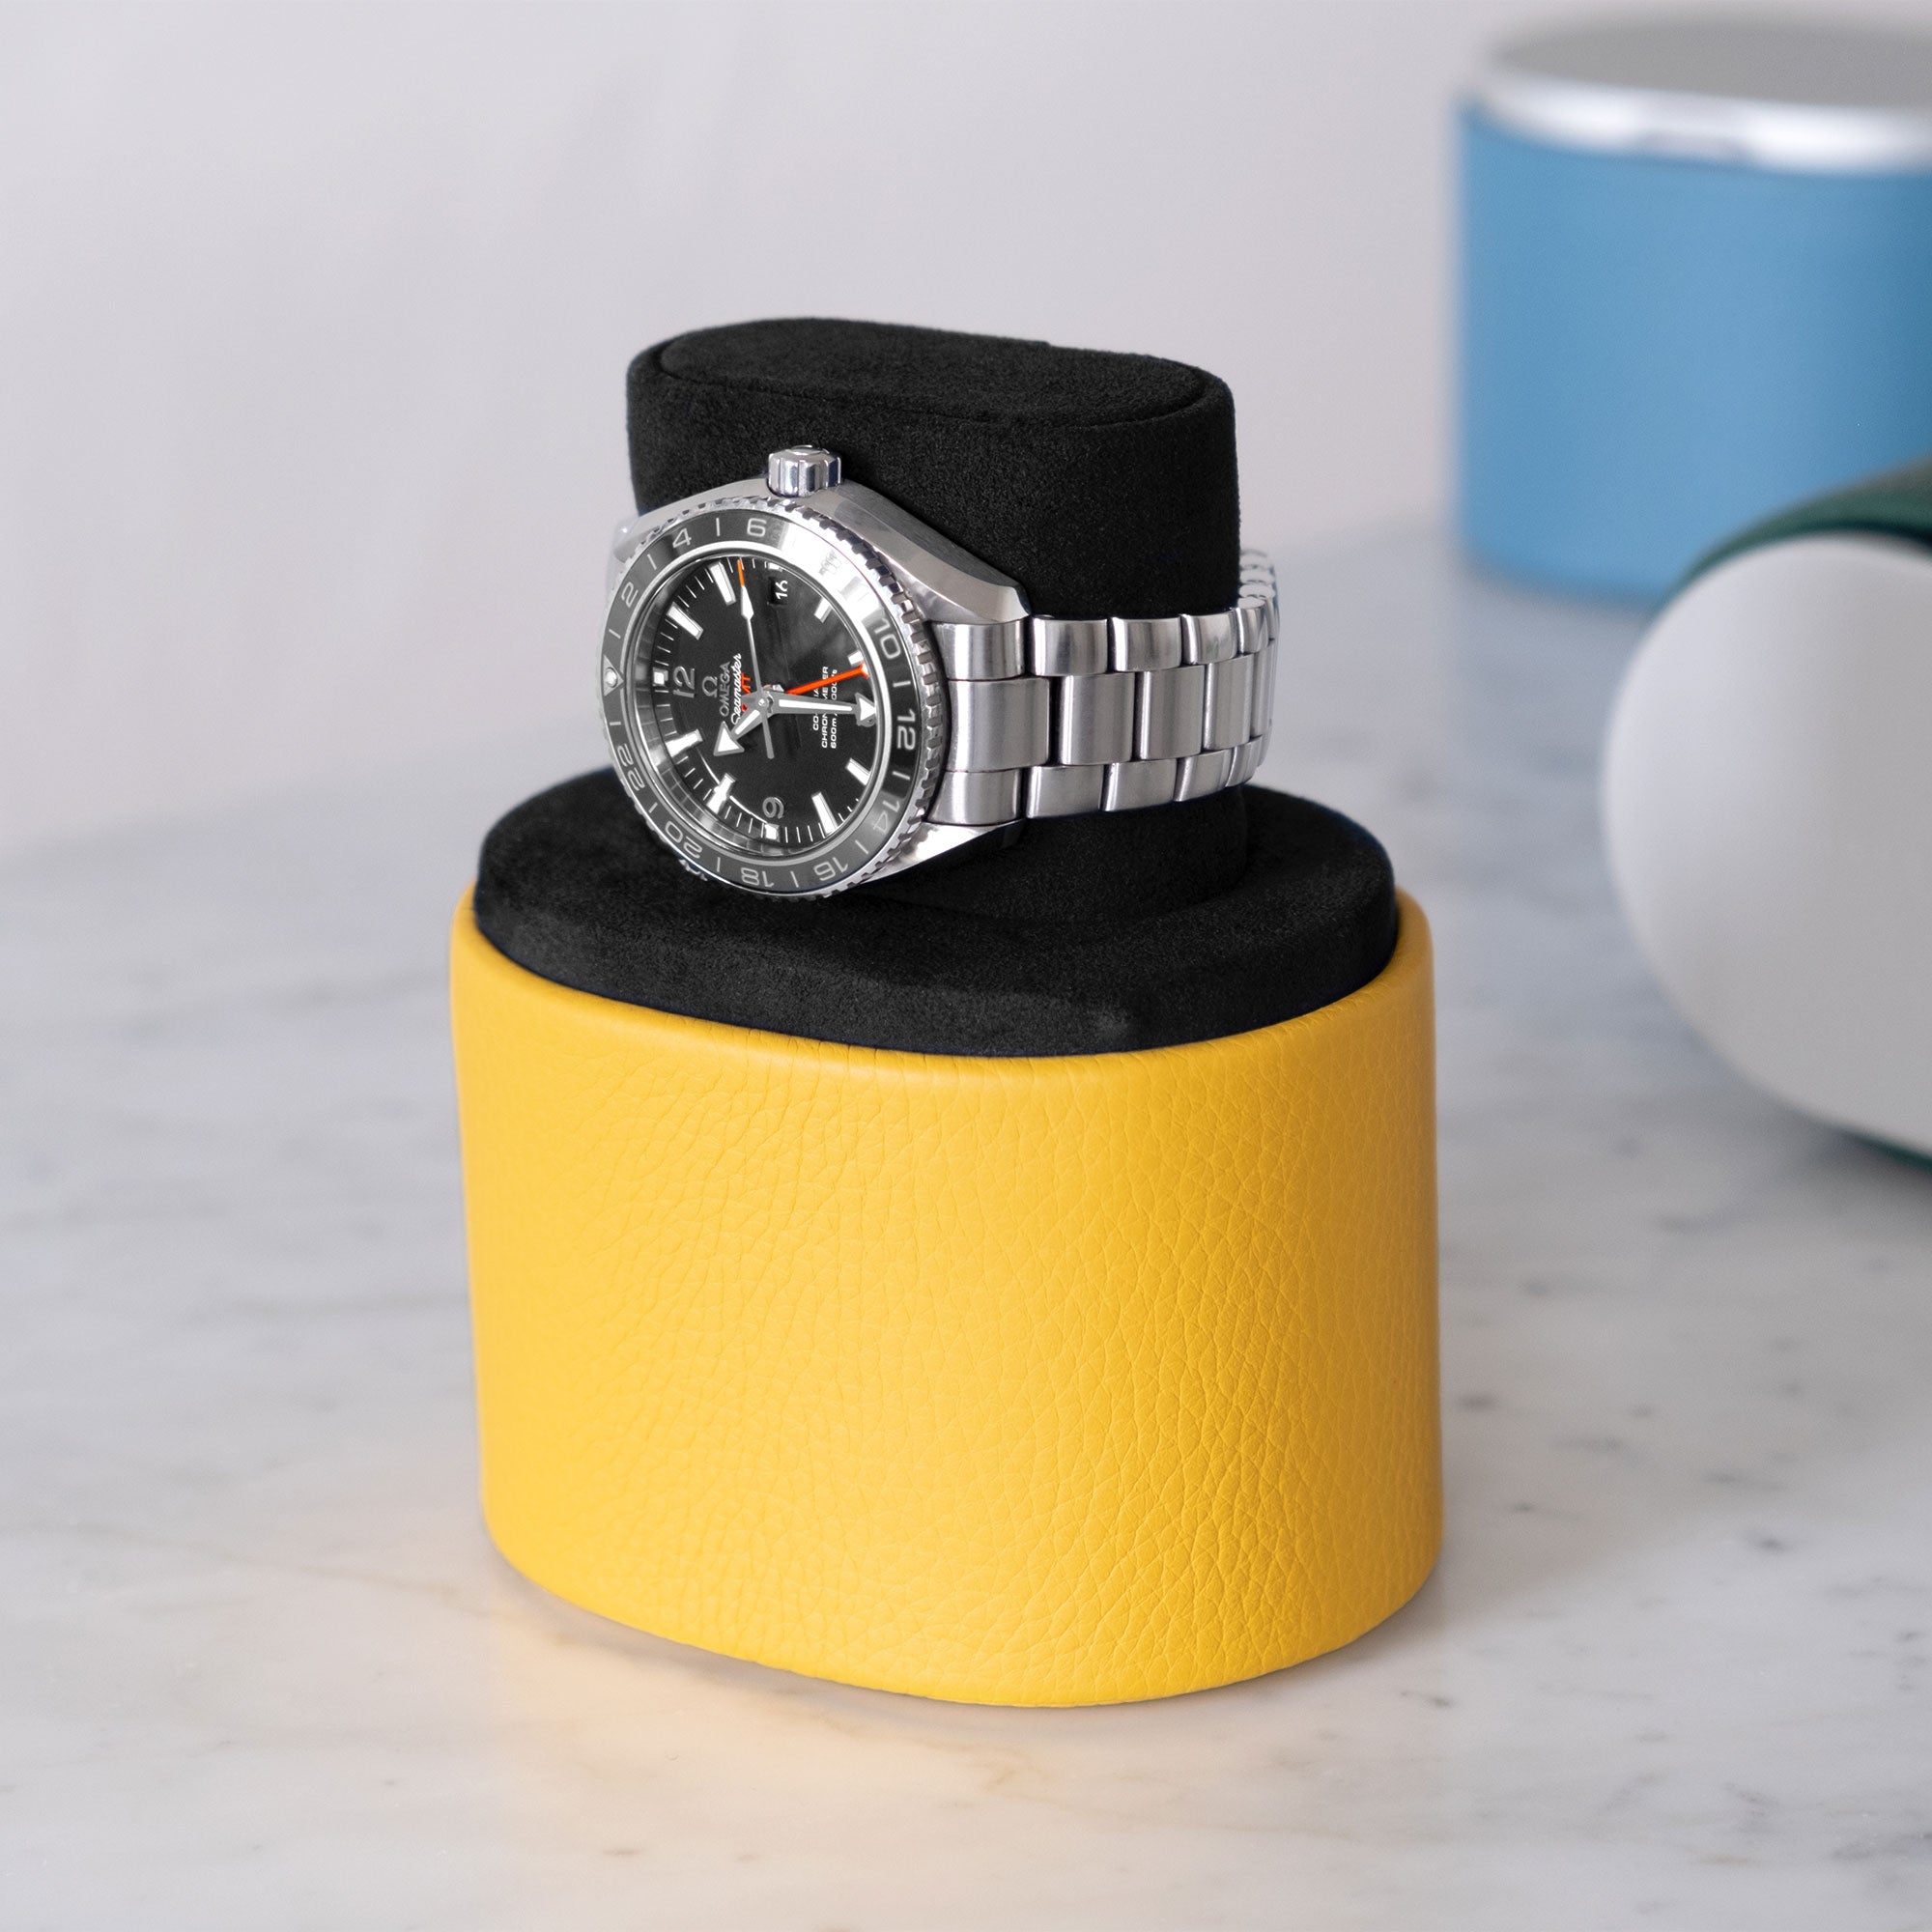 Lifestyle shot of open Theo watch roll in sunflower leather and black interior in convenient portable watch stand position holding one watch